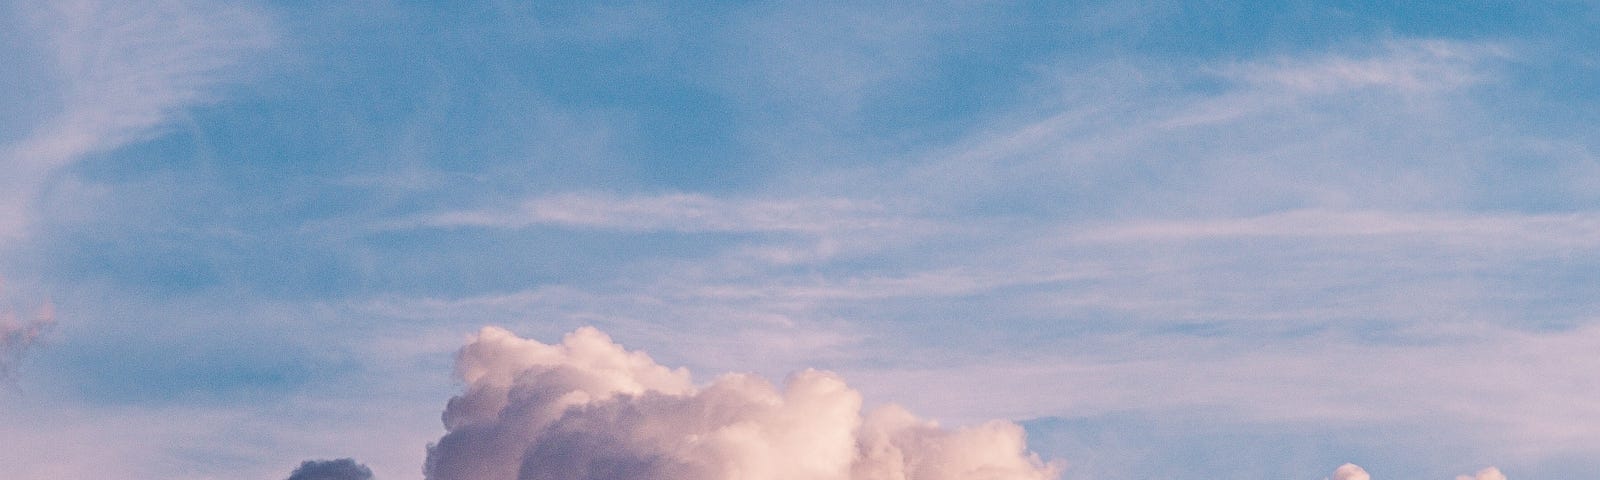 A white cloud with a pastel pink and blue background. It signifies the picturesque nature of our dreams in contrast to the parallel nature of the sacrifices one has to make to chase their dreams.